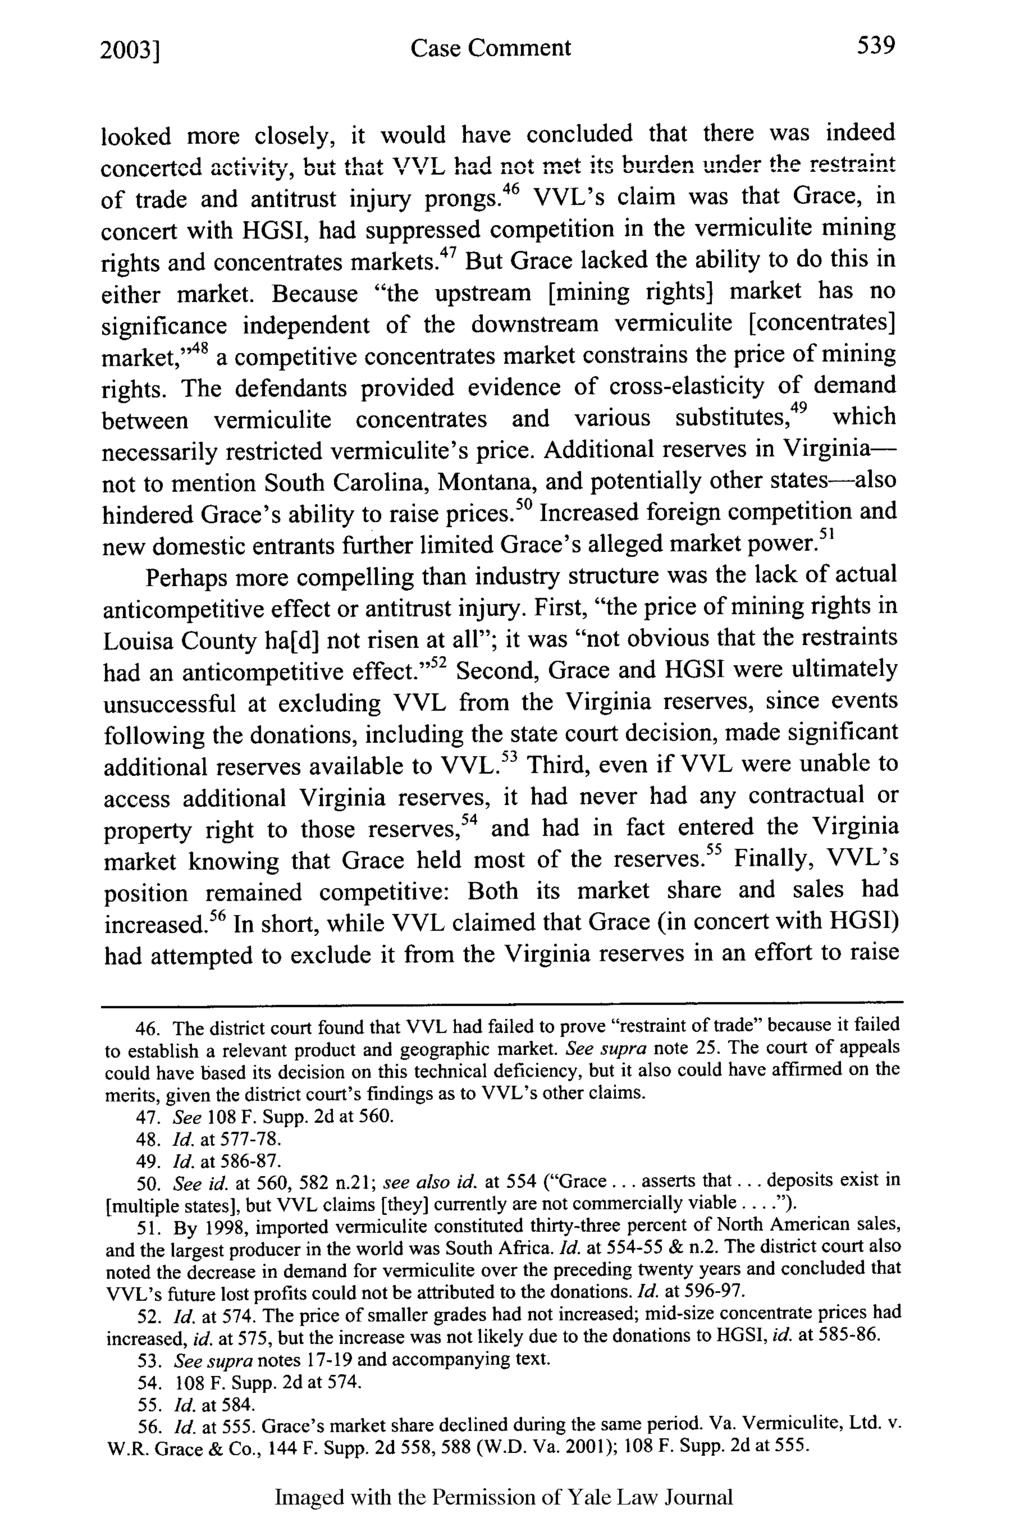 2003] Case Comment looked more closely, it would have concluded that there was indeed concerted activity, but that VVL had not et ;t hurden undler the rctrnint of trade and antitrust injury prongs.